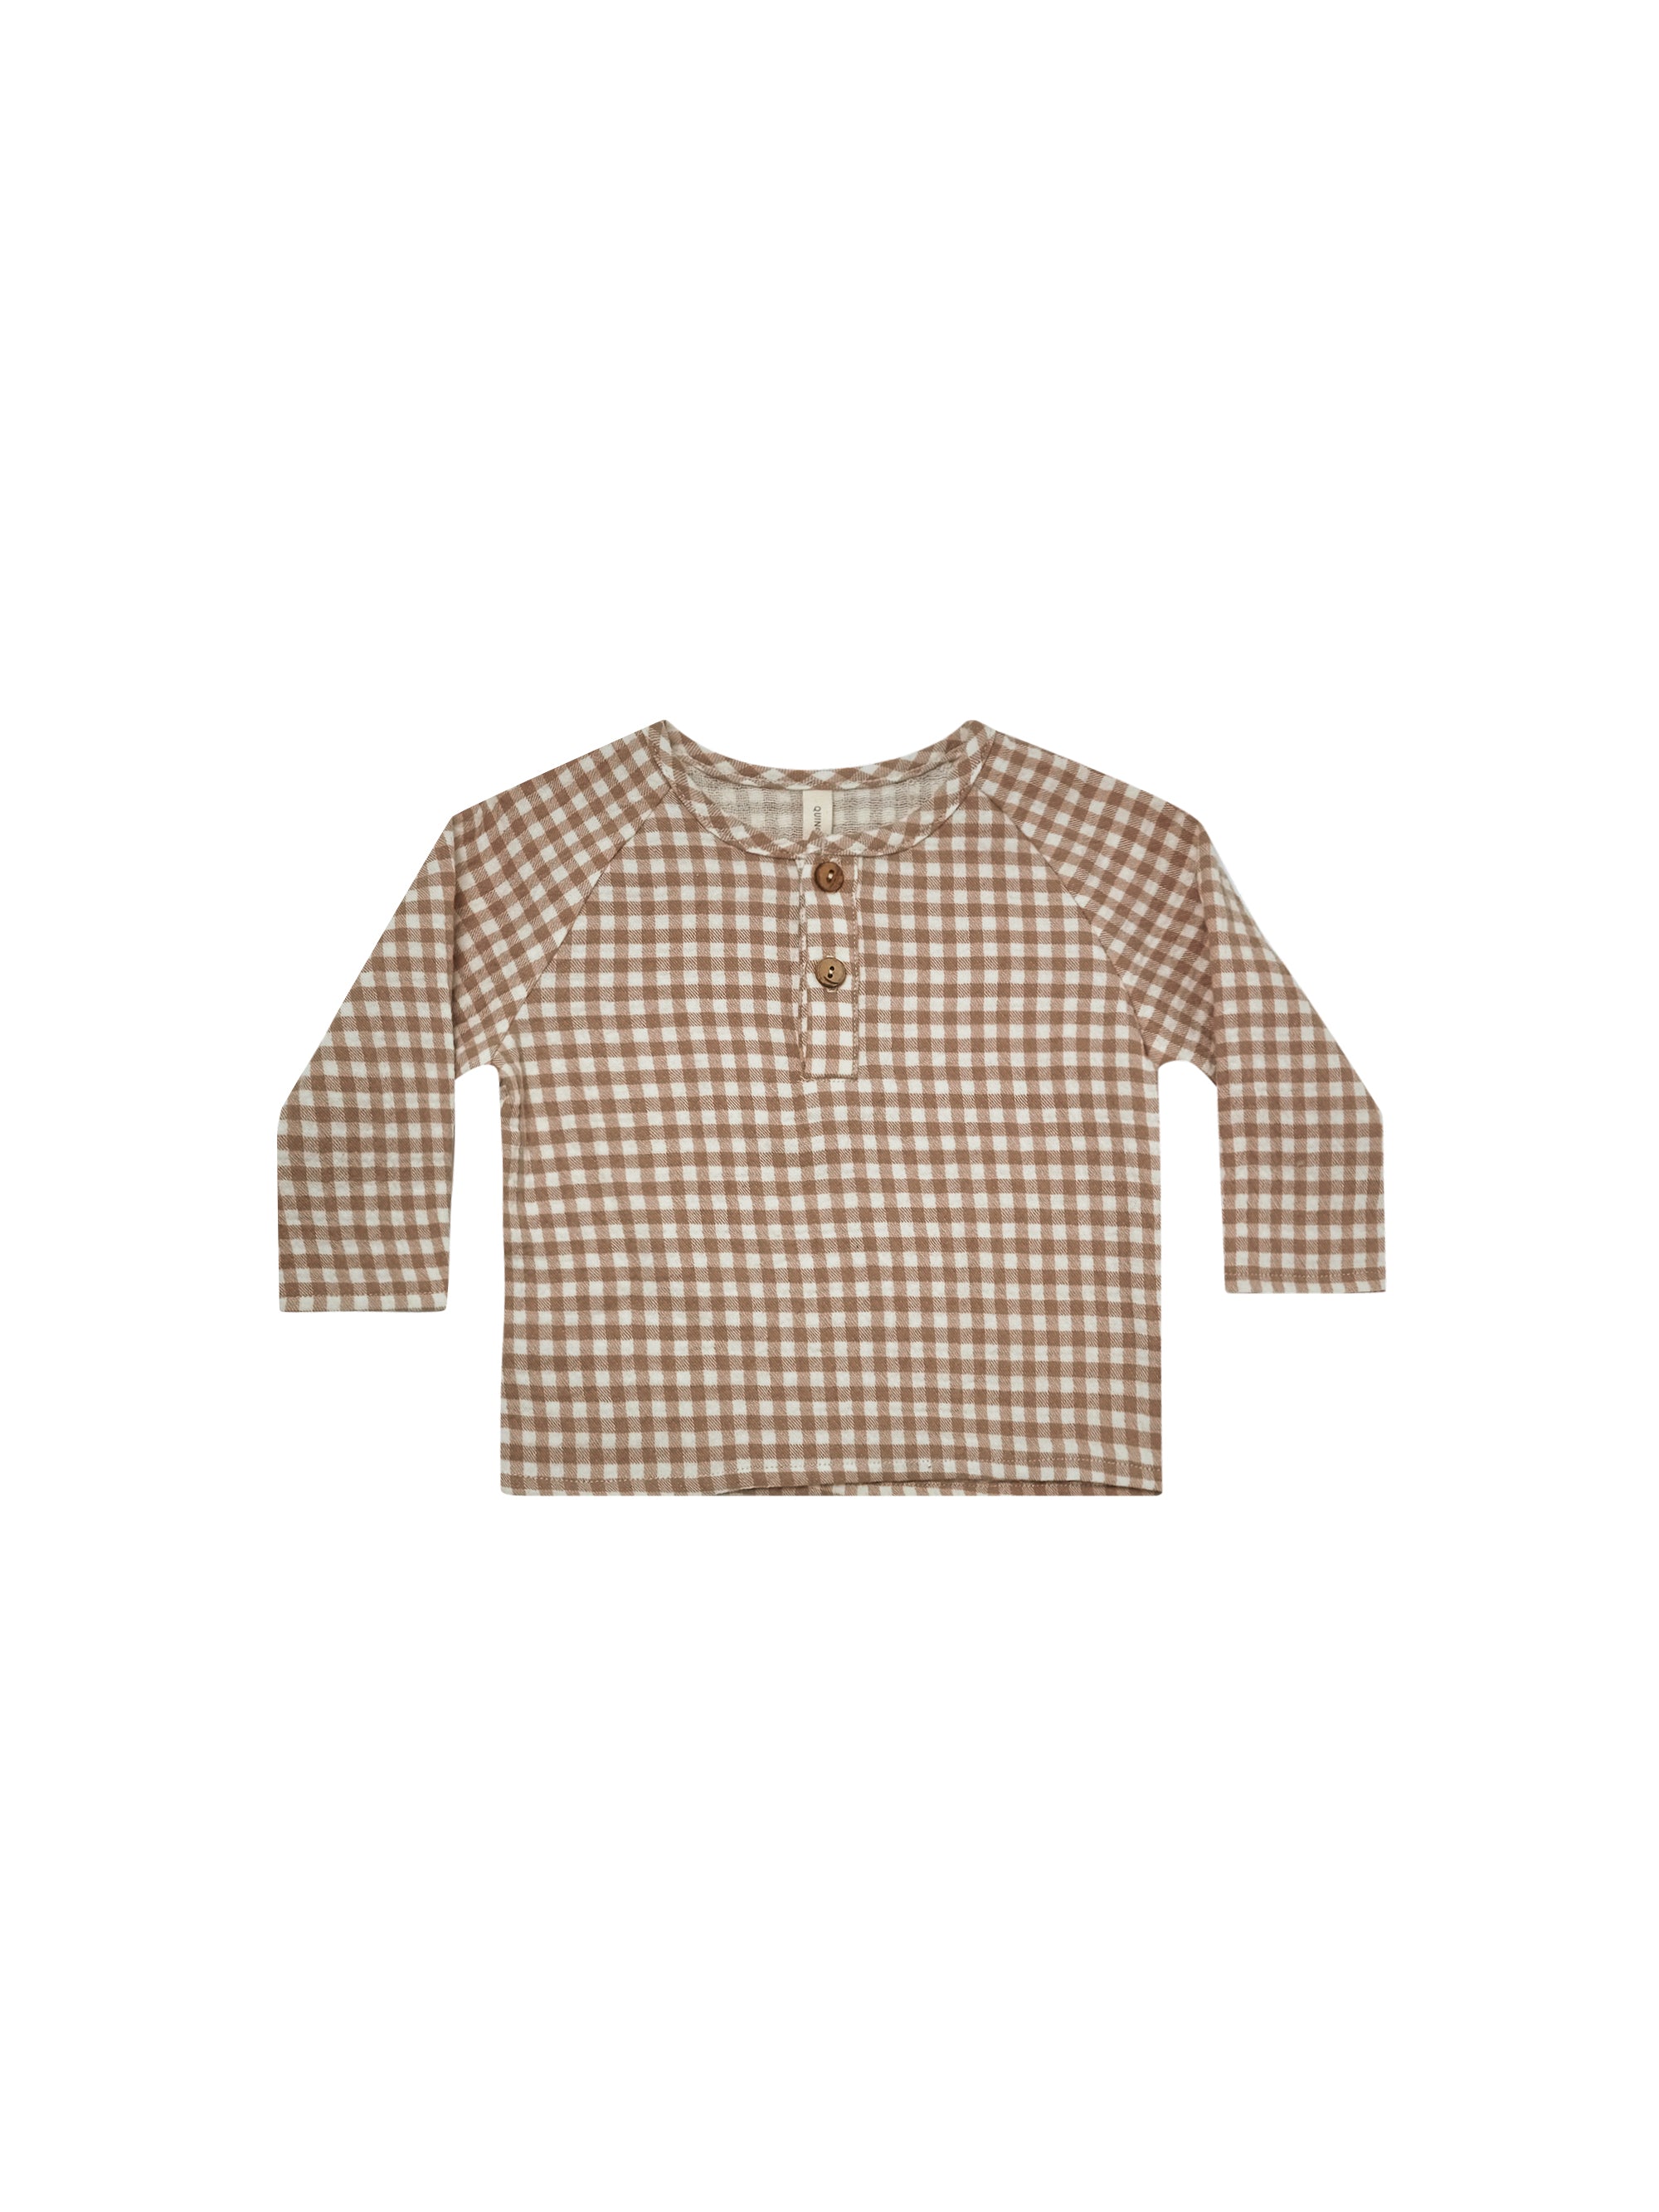 zion shirt | cocoa gingham